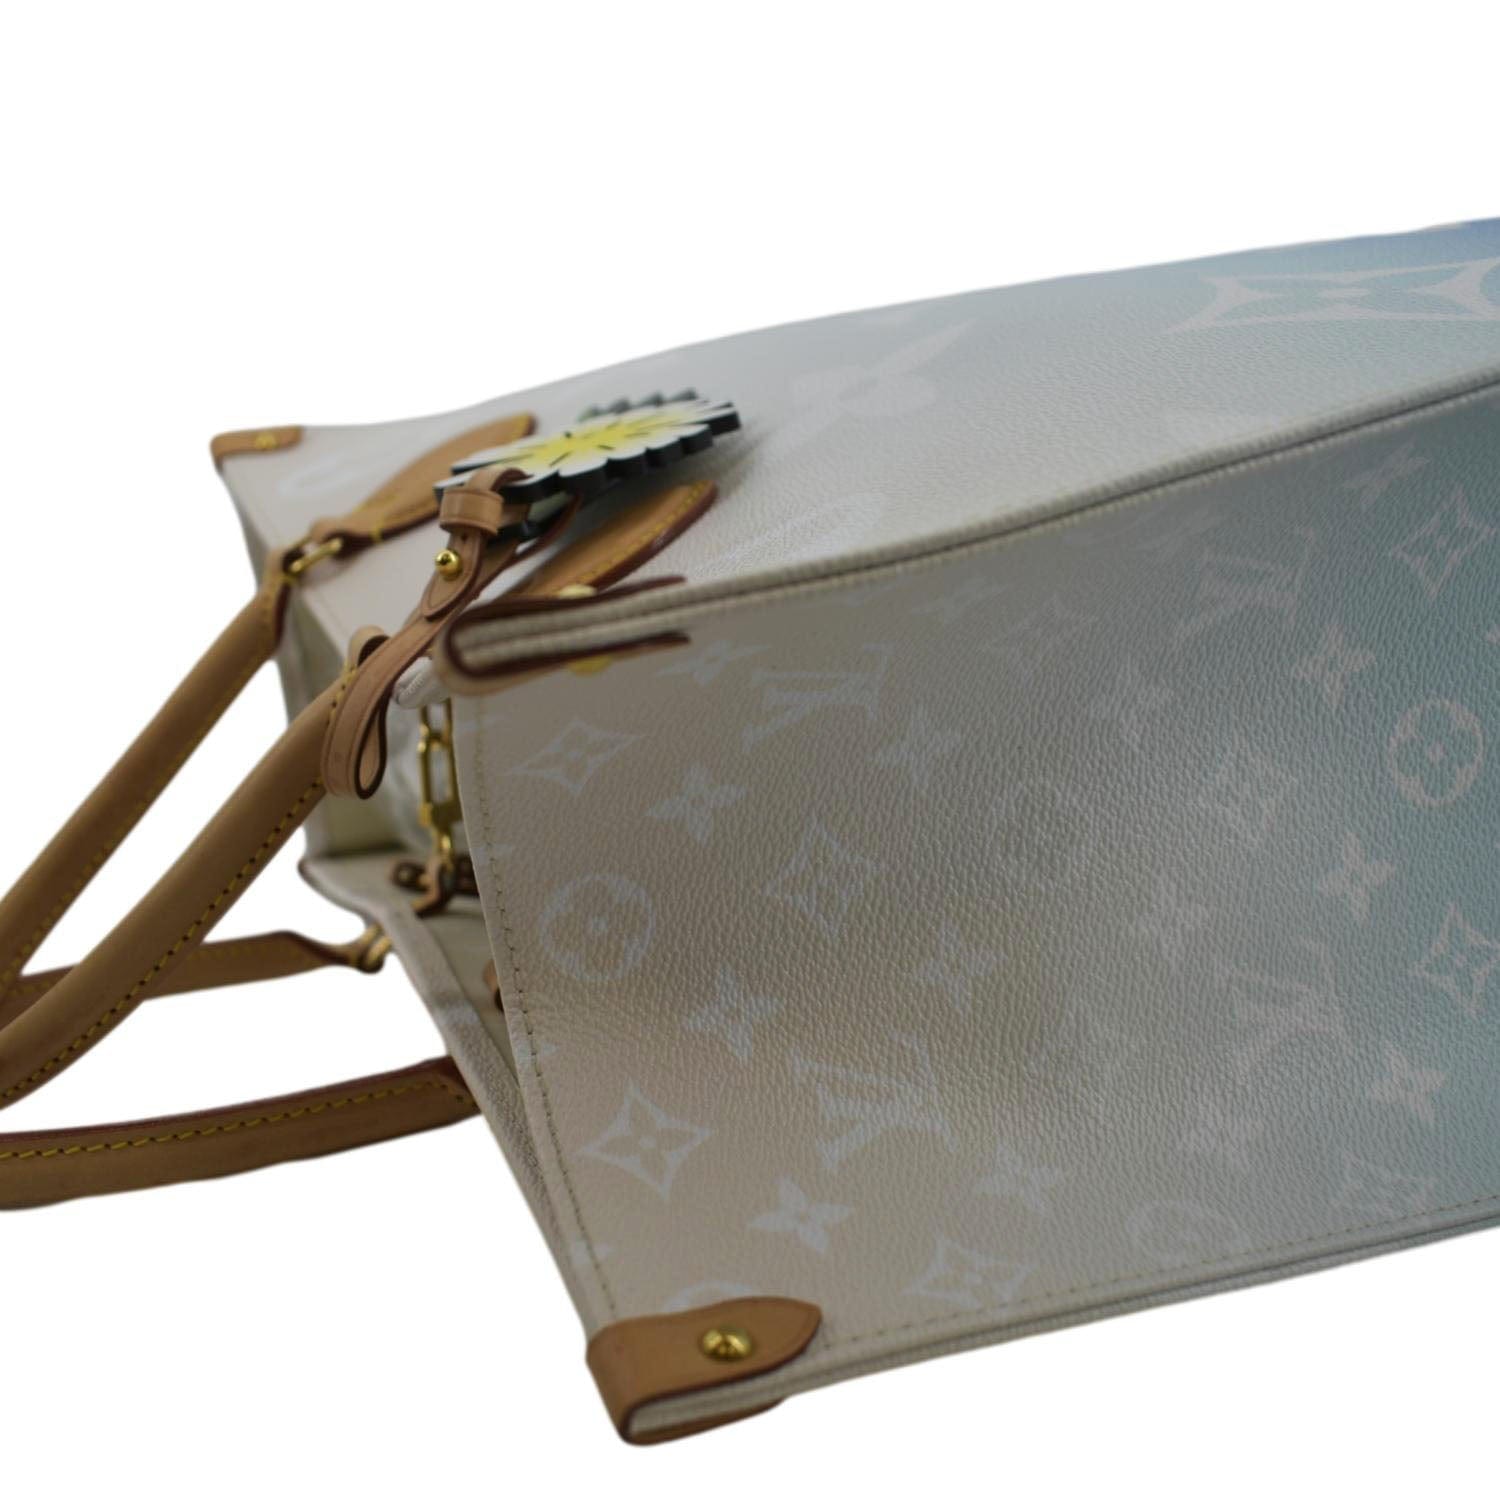 Louis Vuitton "By the Pool" On the go tote - Blue